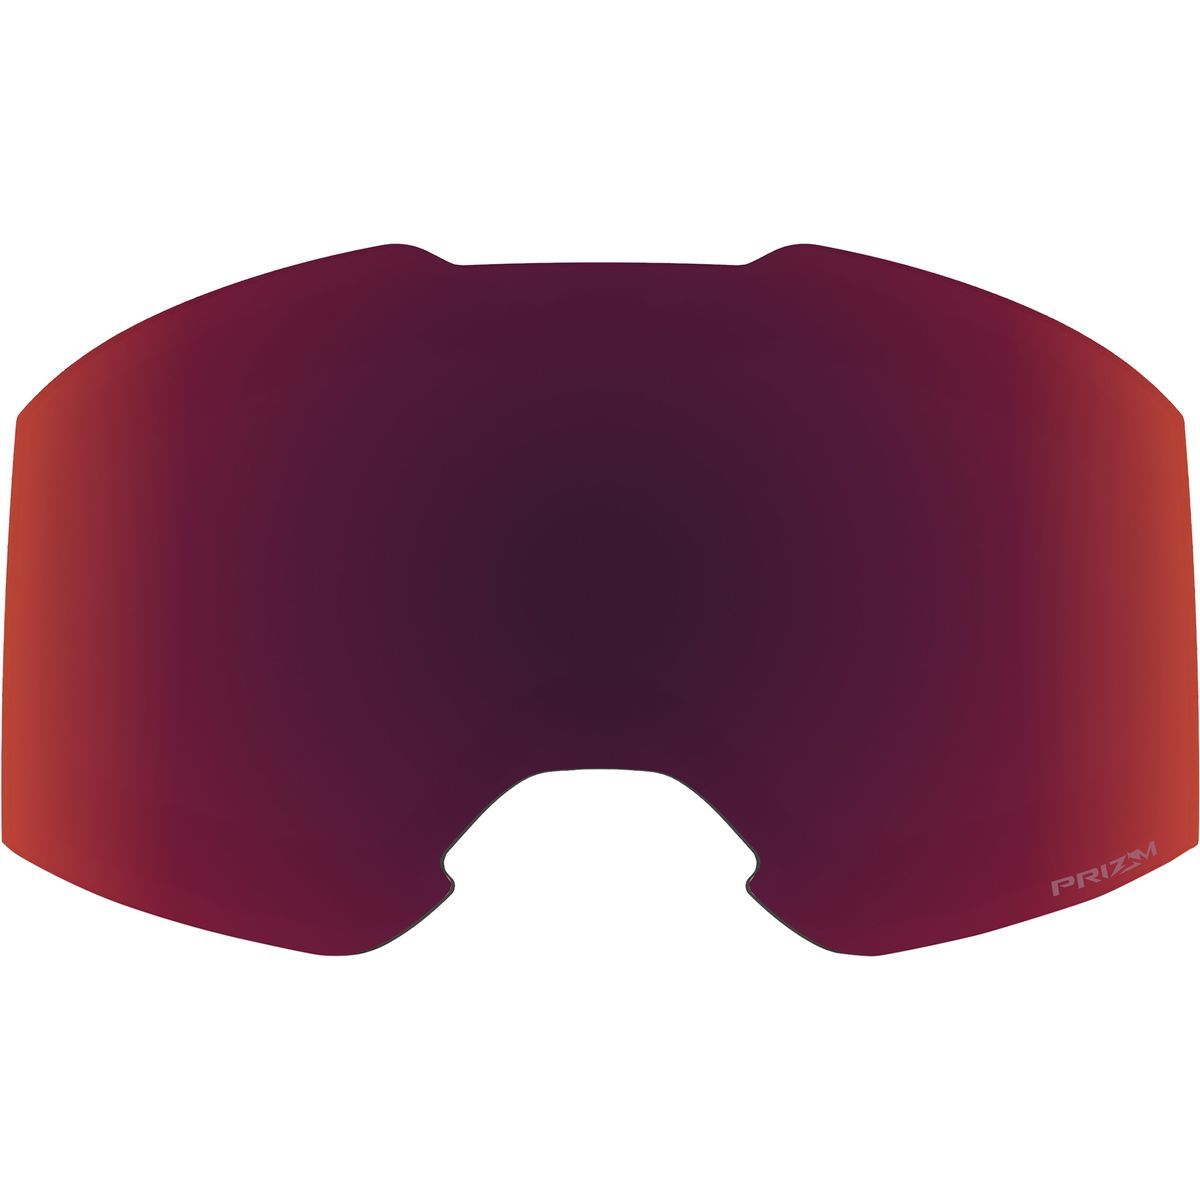 Fall Line L Goggles Replacement Lens